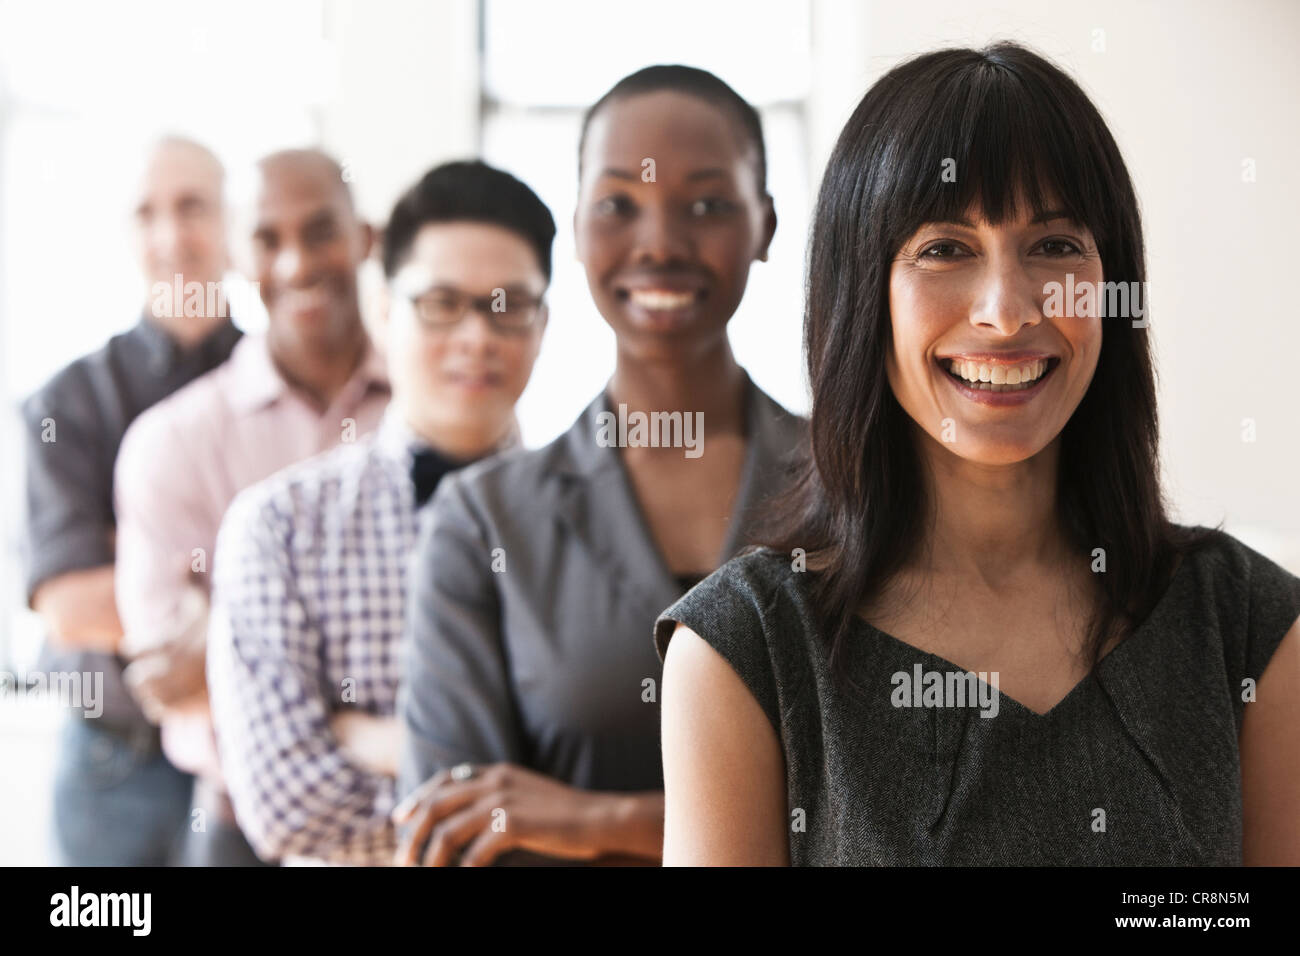 Portrait of businesspeople in a line Stock Photo